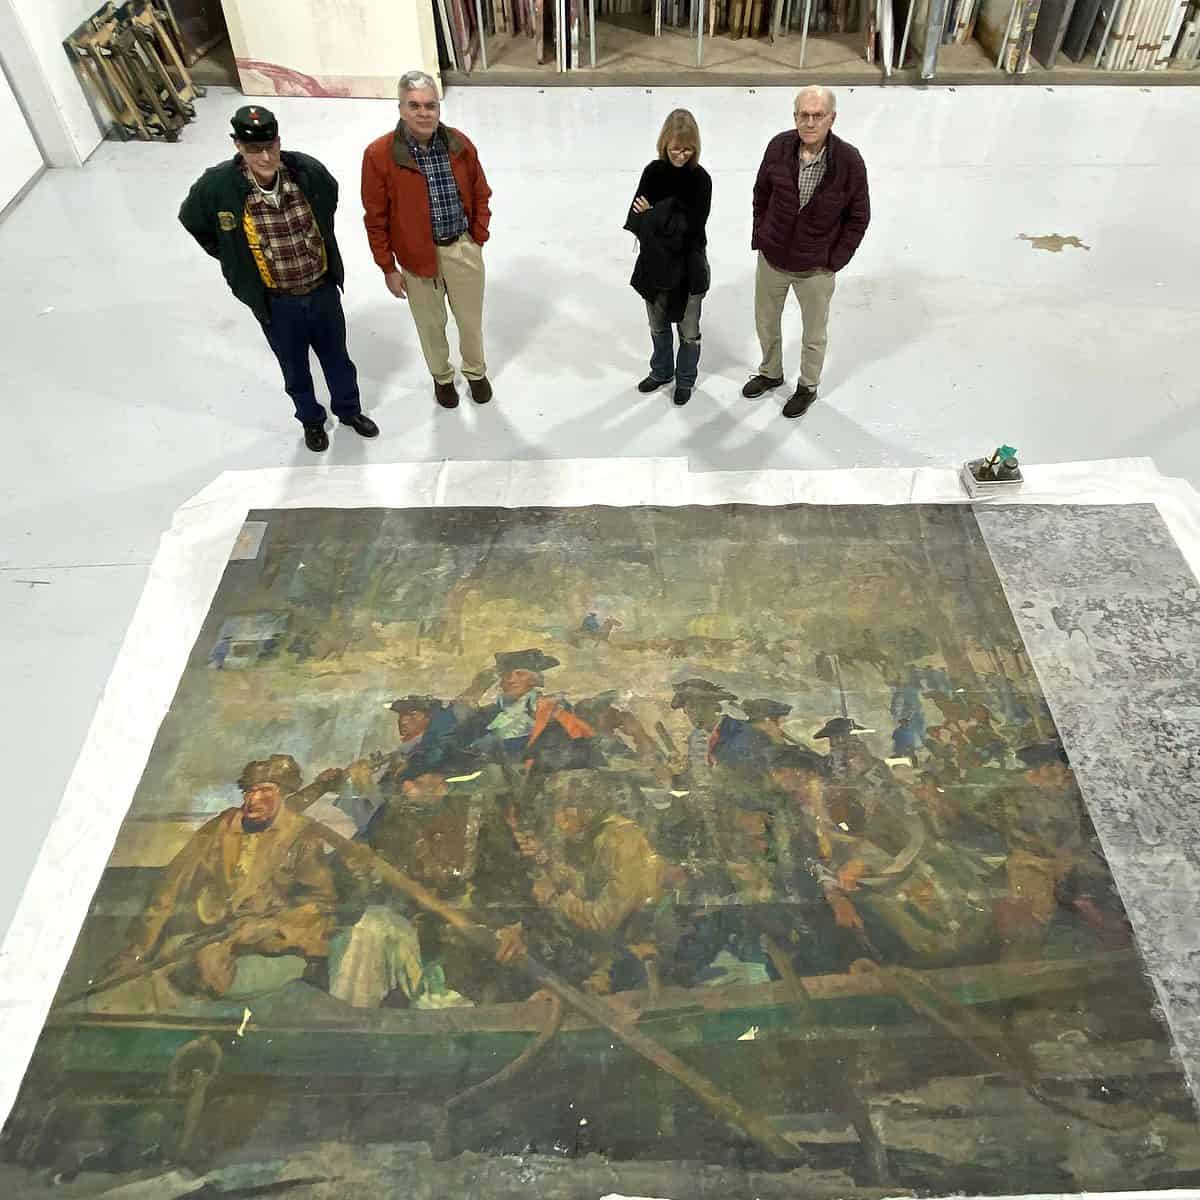 Ewing historian’s sleuthing leads to rediscovery of historic mural of Washington crossing the Delaware River